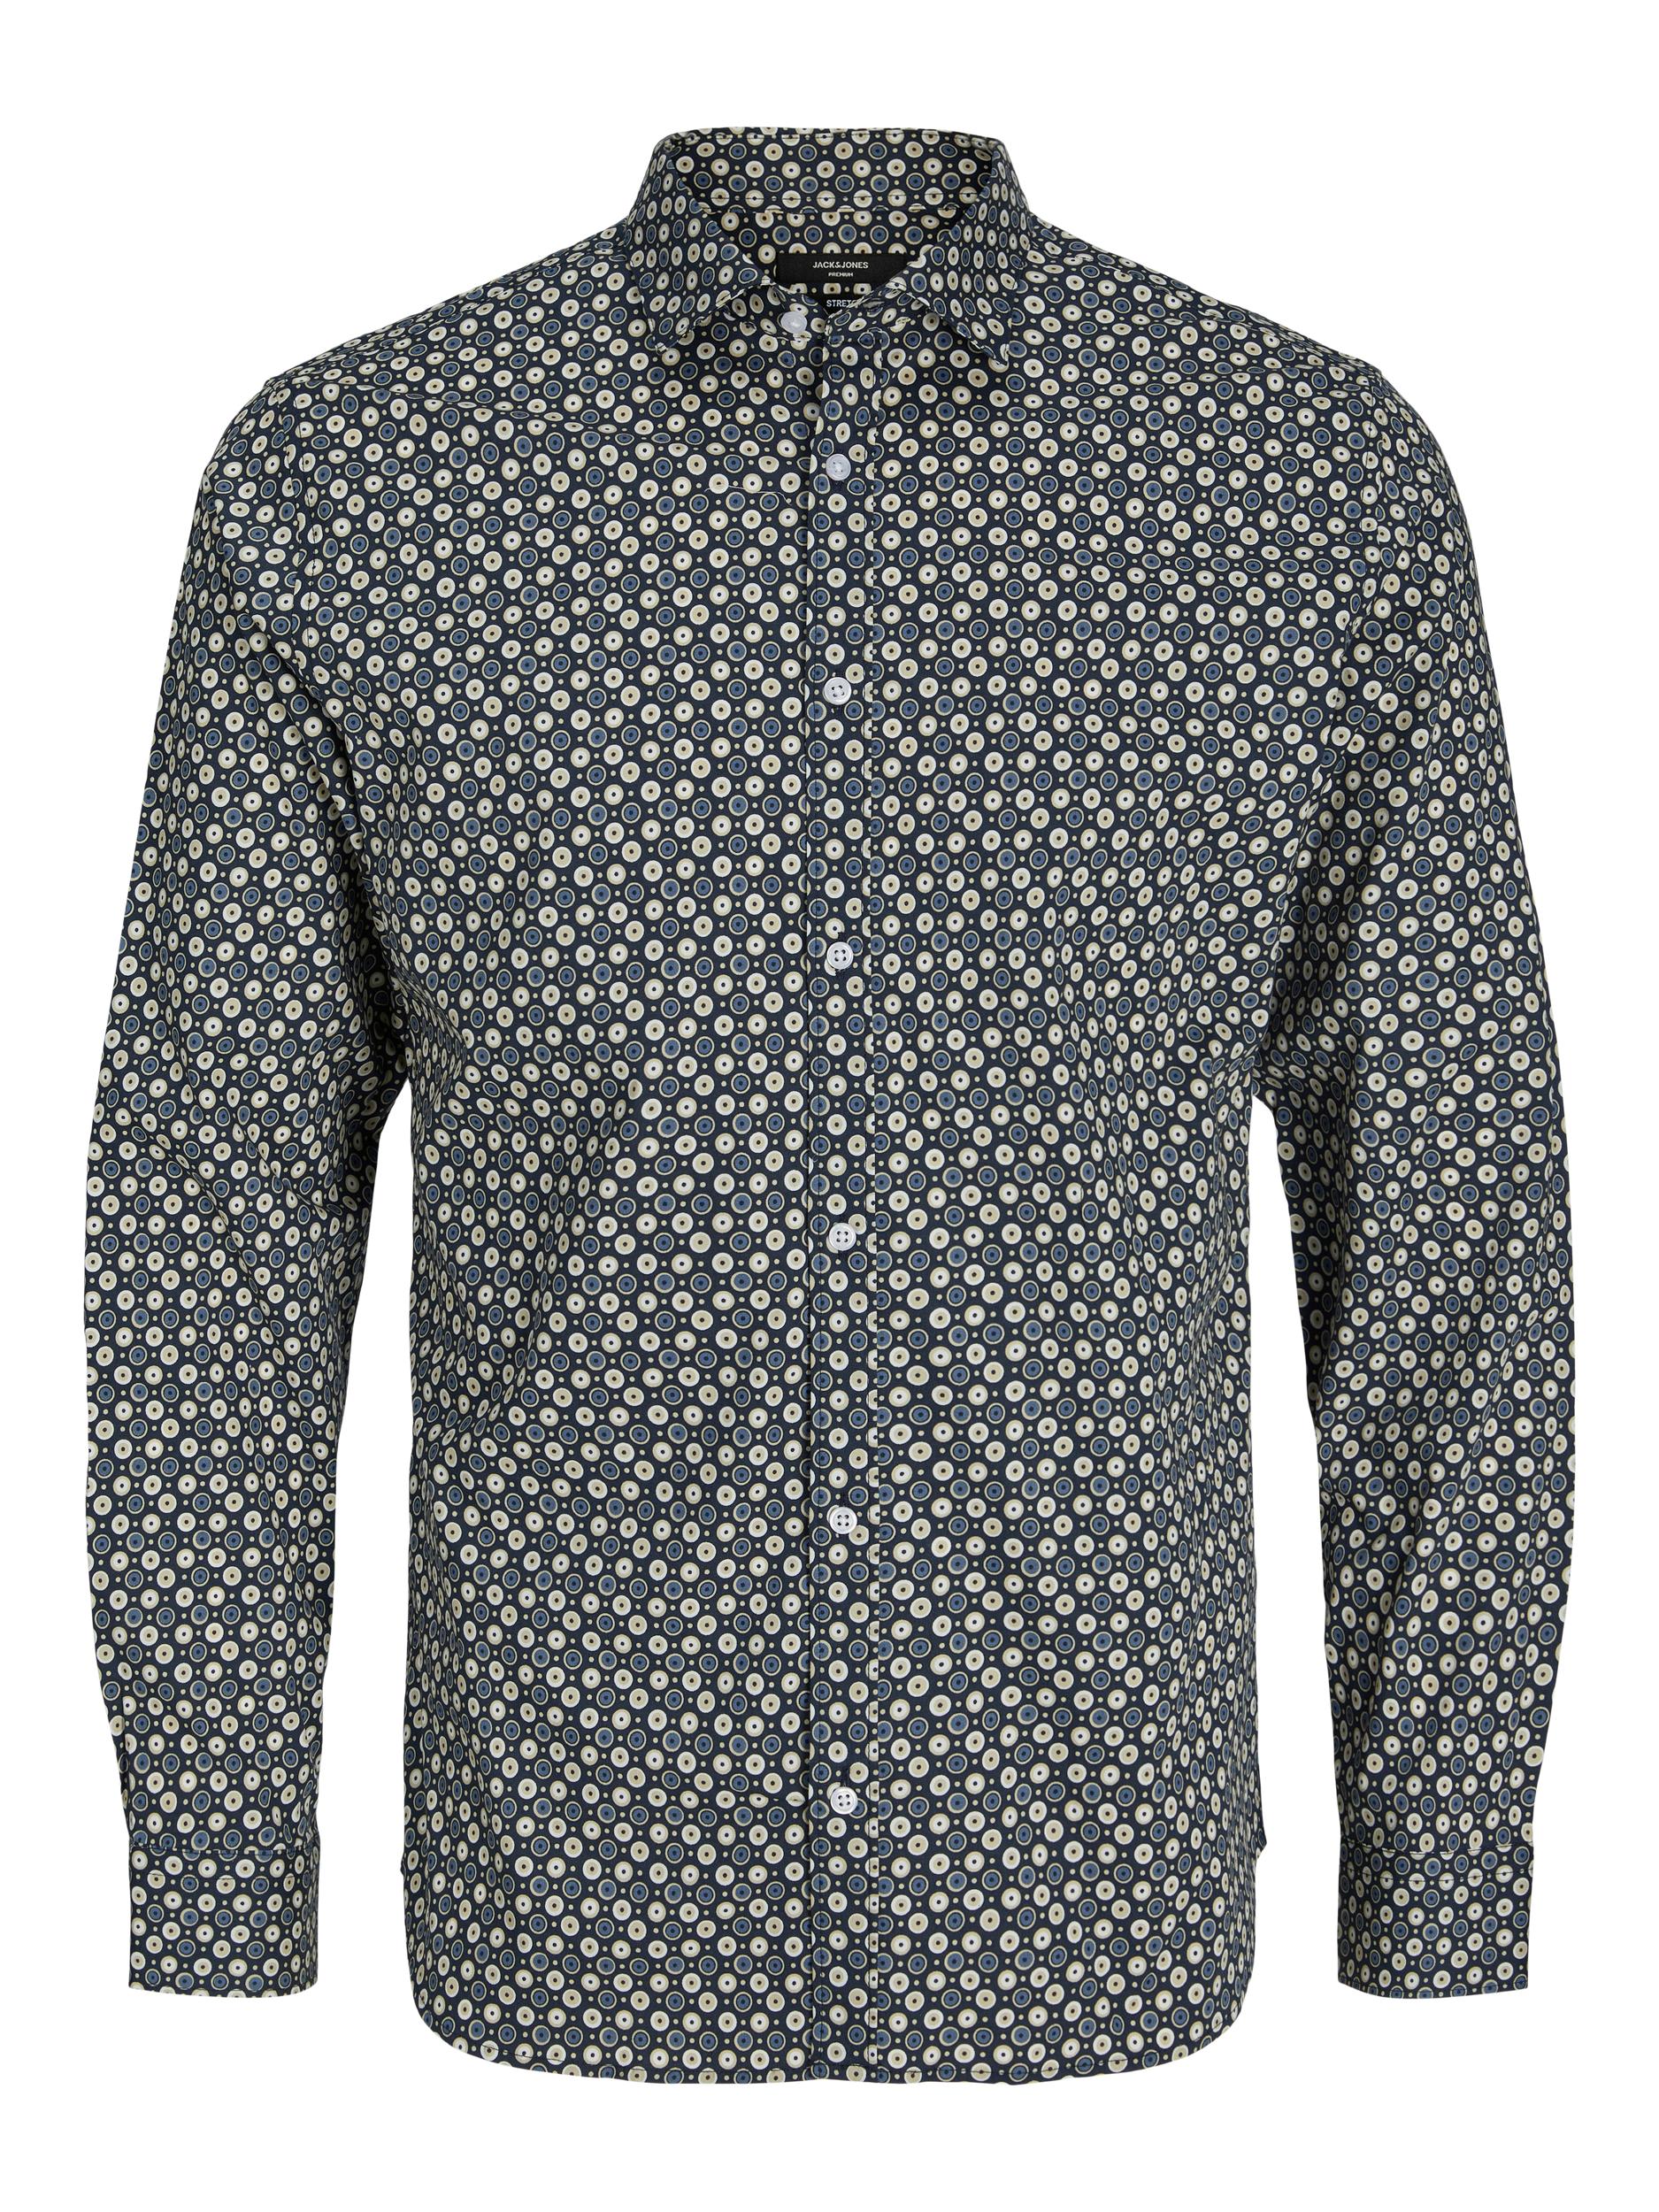 Men's Blackpool Stretch Shirt Long Sleeve Navy Blazer-Ghost Front View